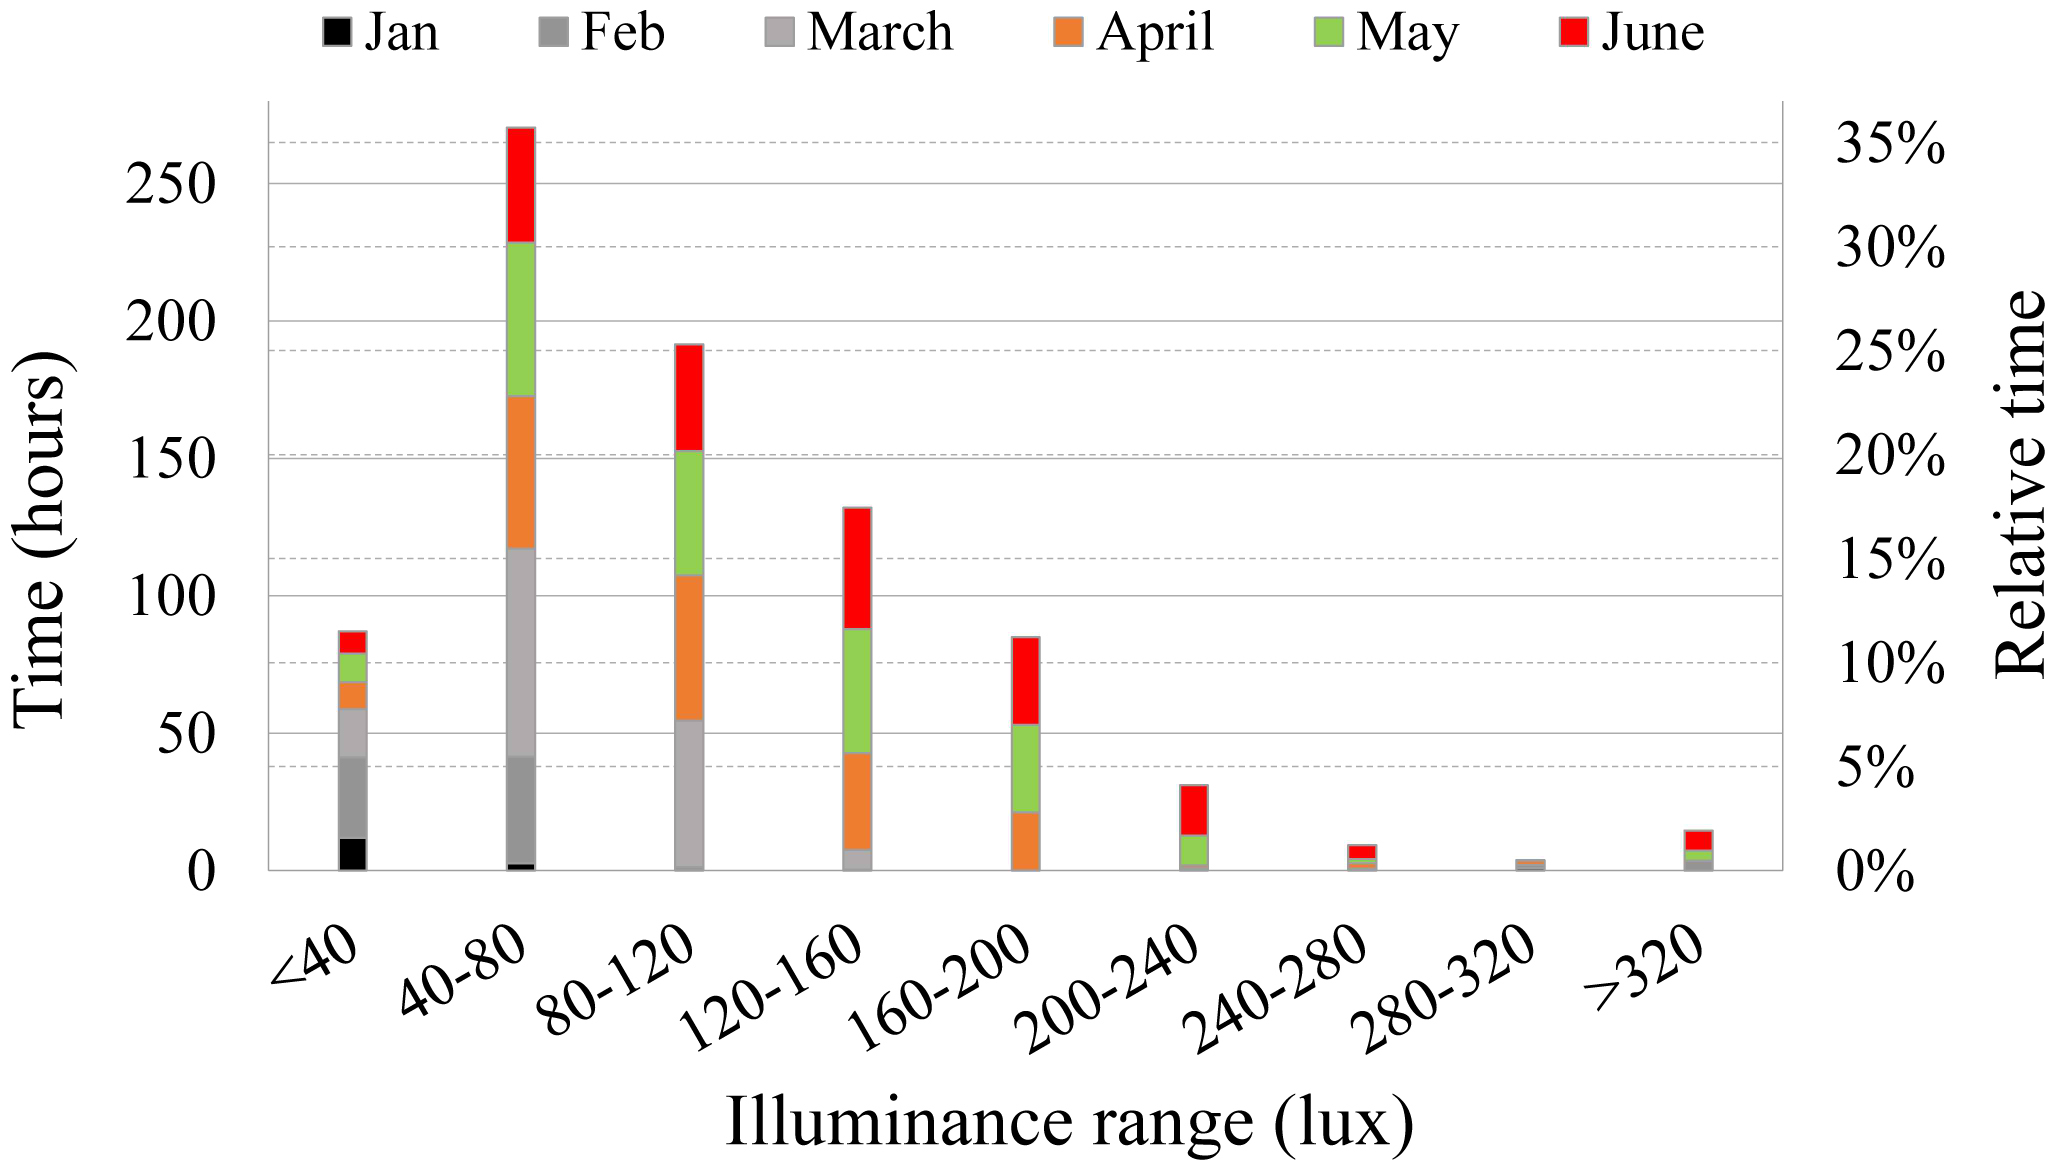 Daylight illuminance frequency distribution at 0.7 m above floor level, based on measured data from sensor s1, in house 2, between 08.00-16.00 hours during January to June.